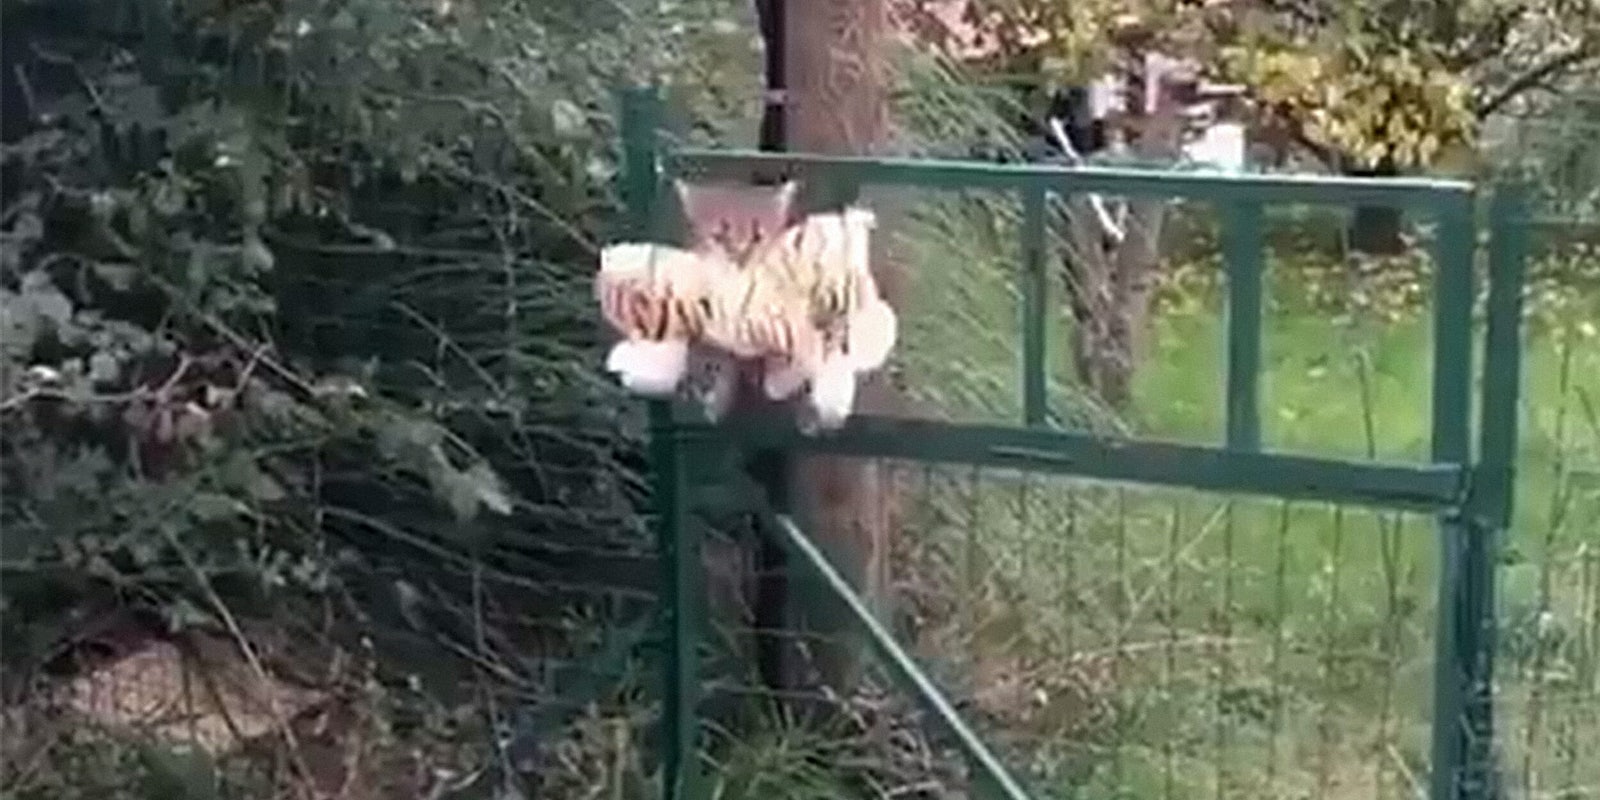 Video shows kitten with stuffed tiger in its mouth.